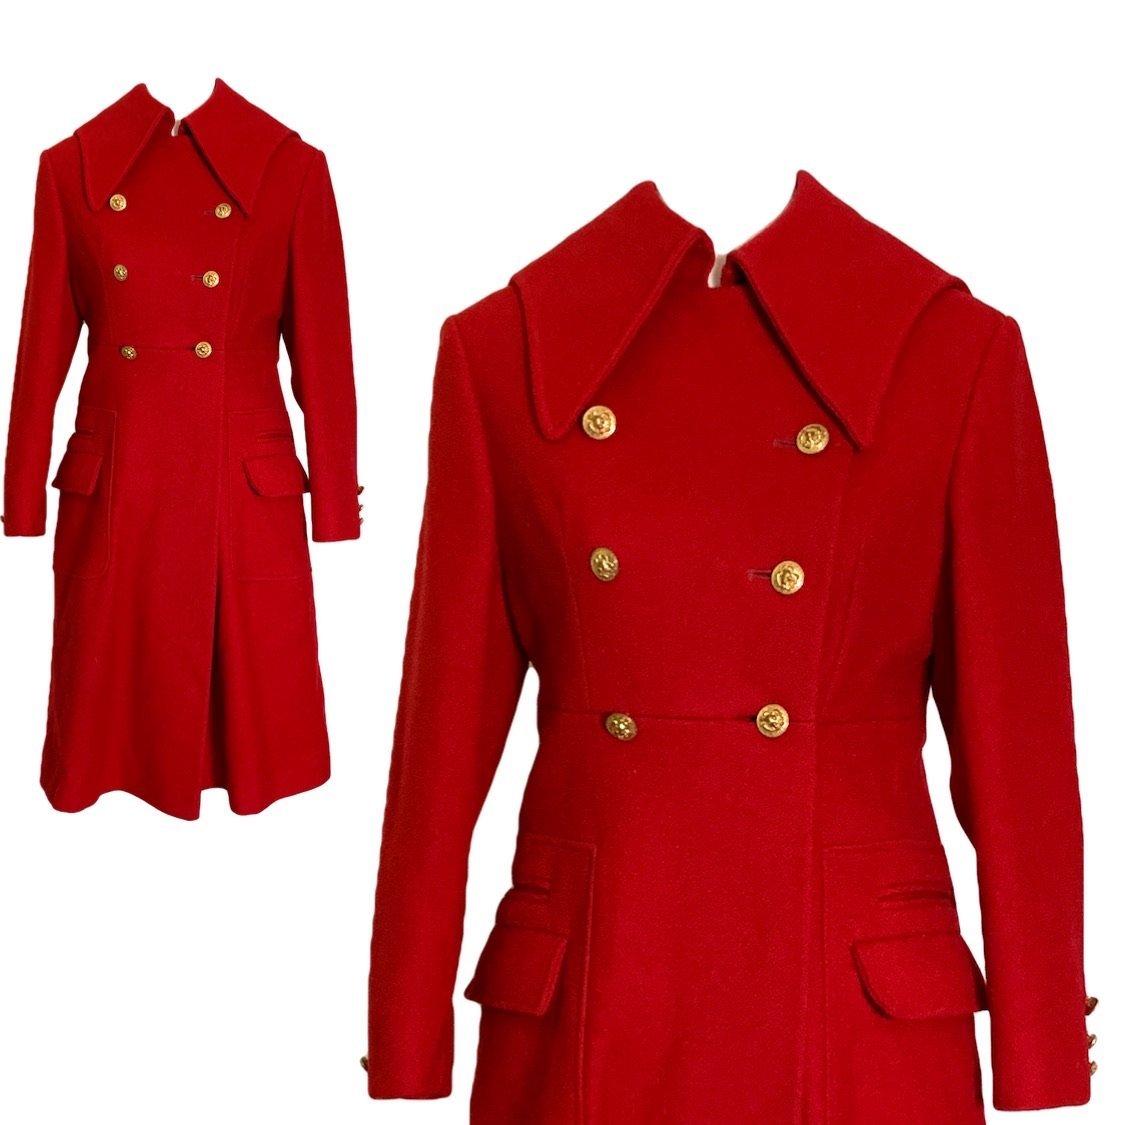 1960s Red Wool Coat by Preen. Warm Winter Coat. Military and Sailor St